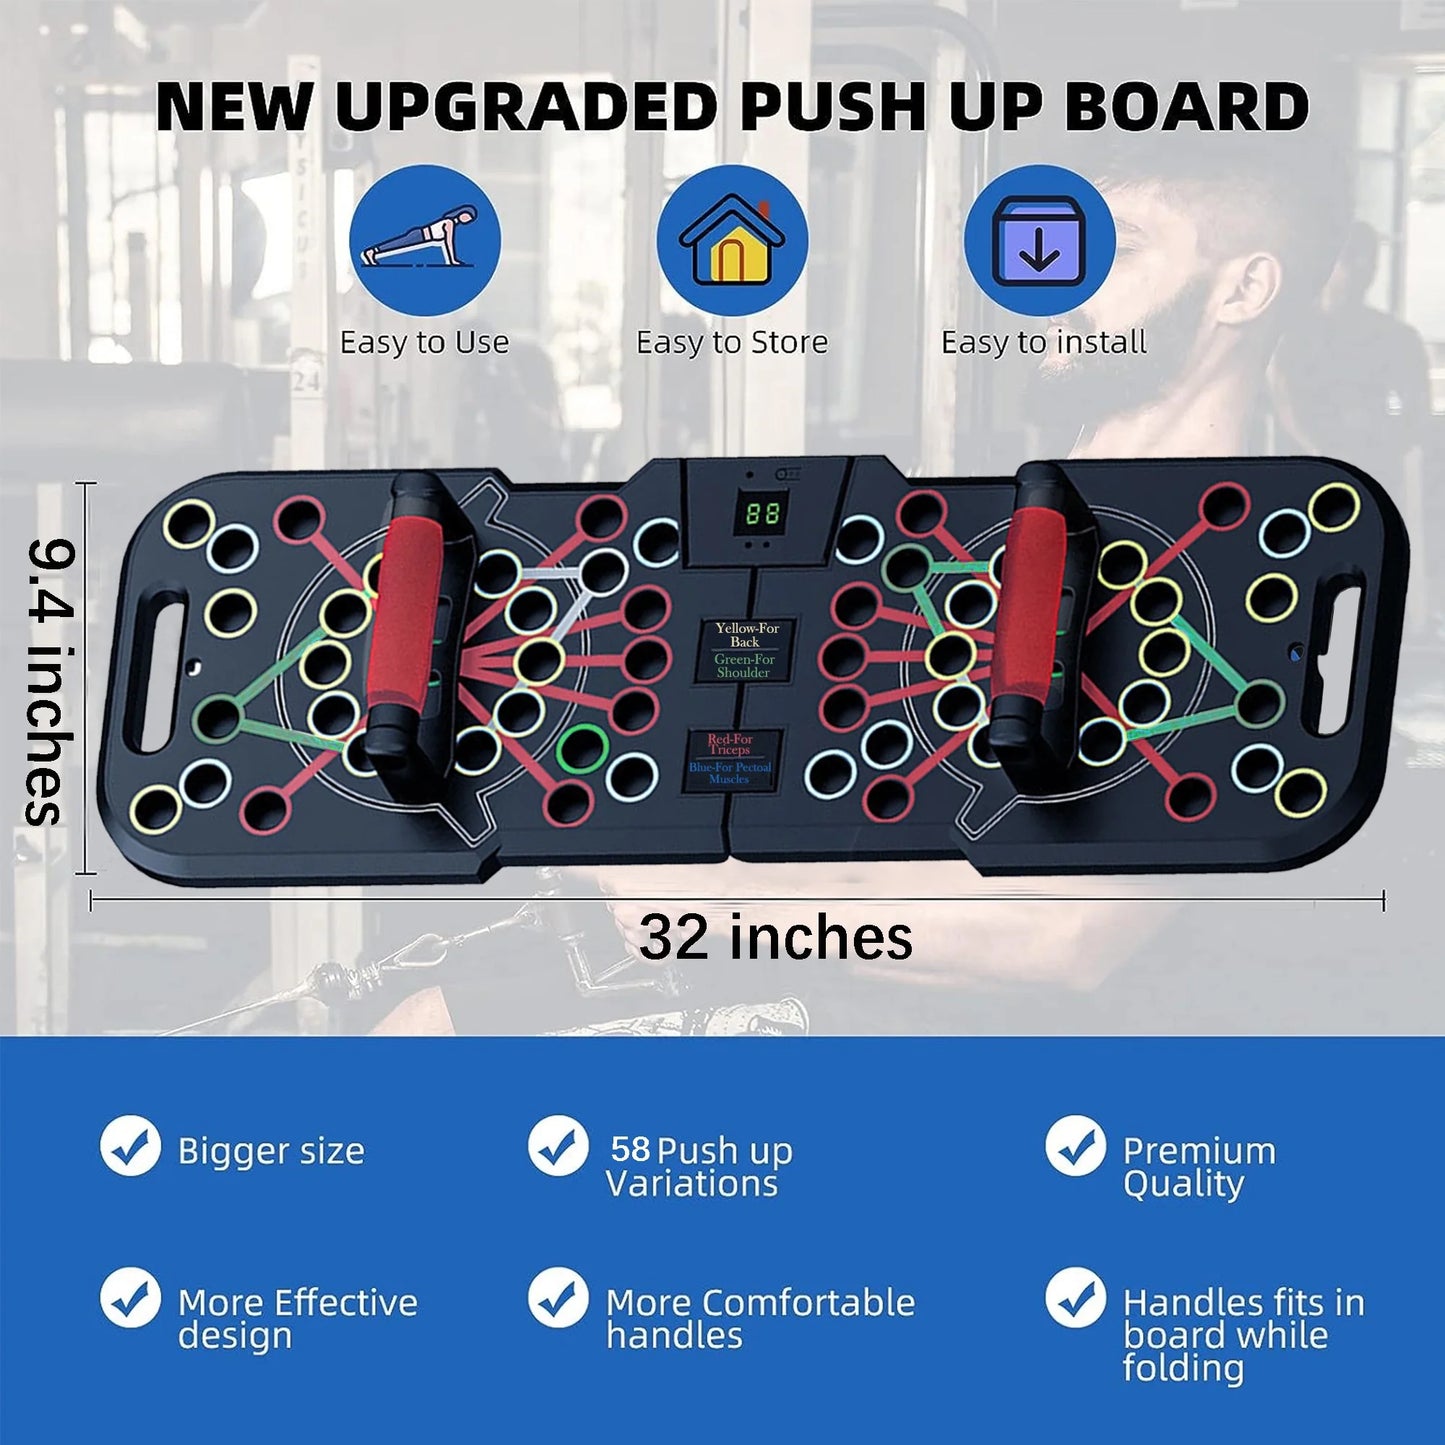 Push up Board with Smart Count, Multi-Function 60 in 1 Push up Bar (Foldable & Portable),Push up Handles for Floor,Professional Home Workout Equipment,Gym Equipment Strength Training Equipment for Men